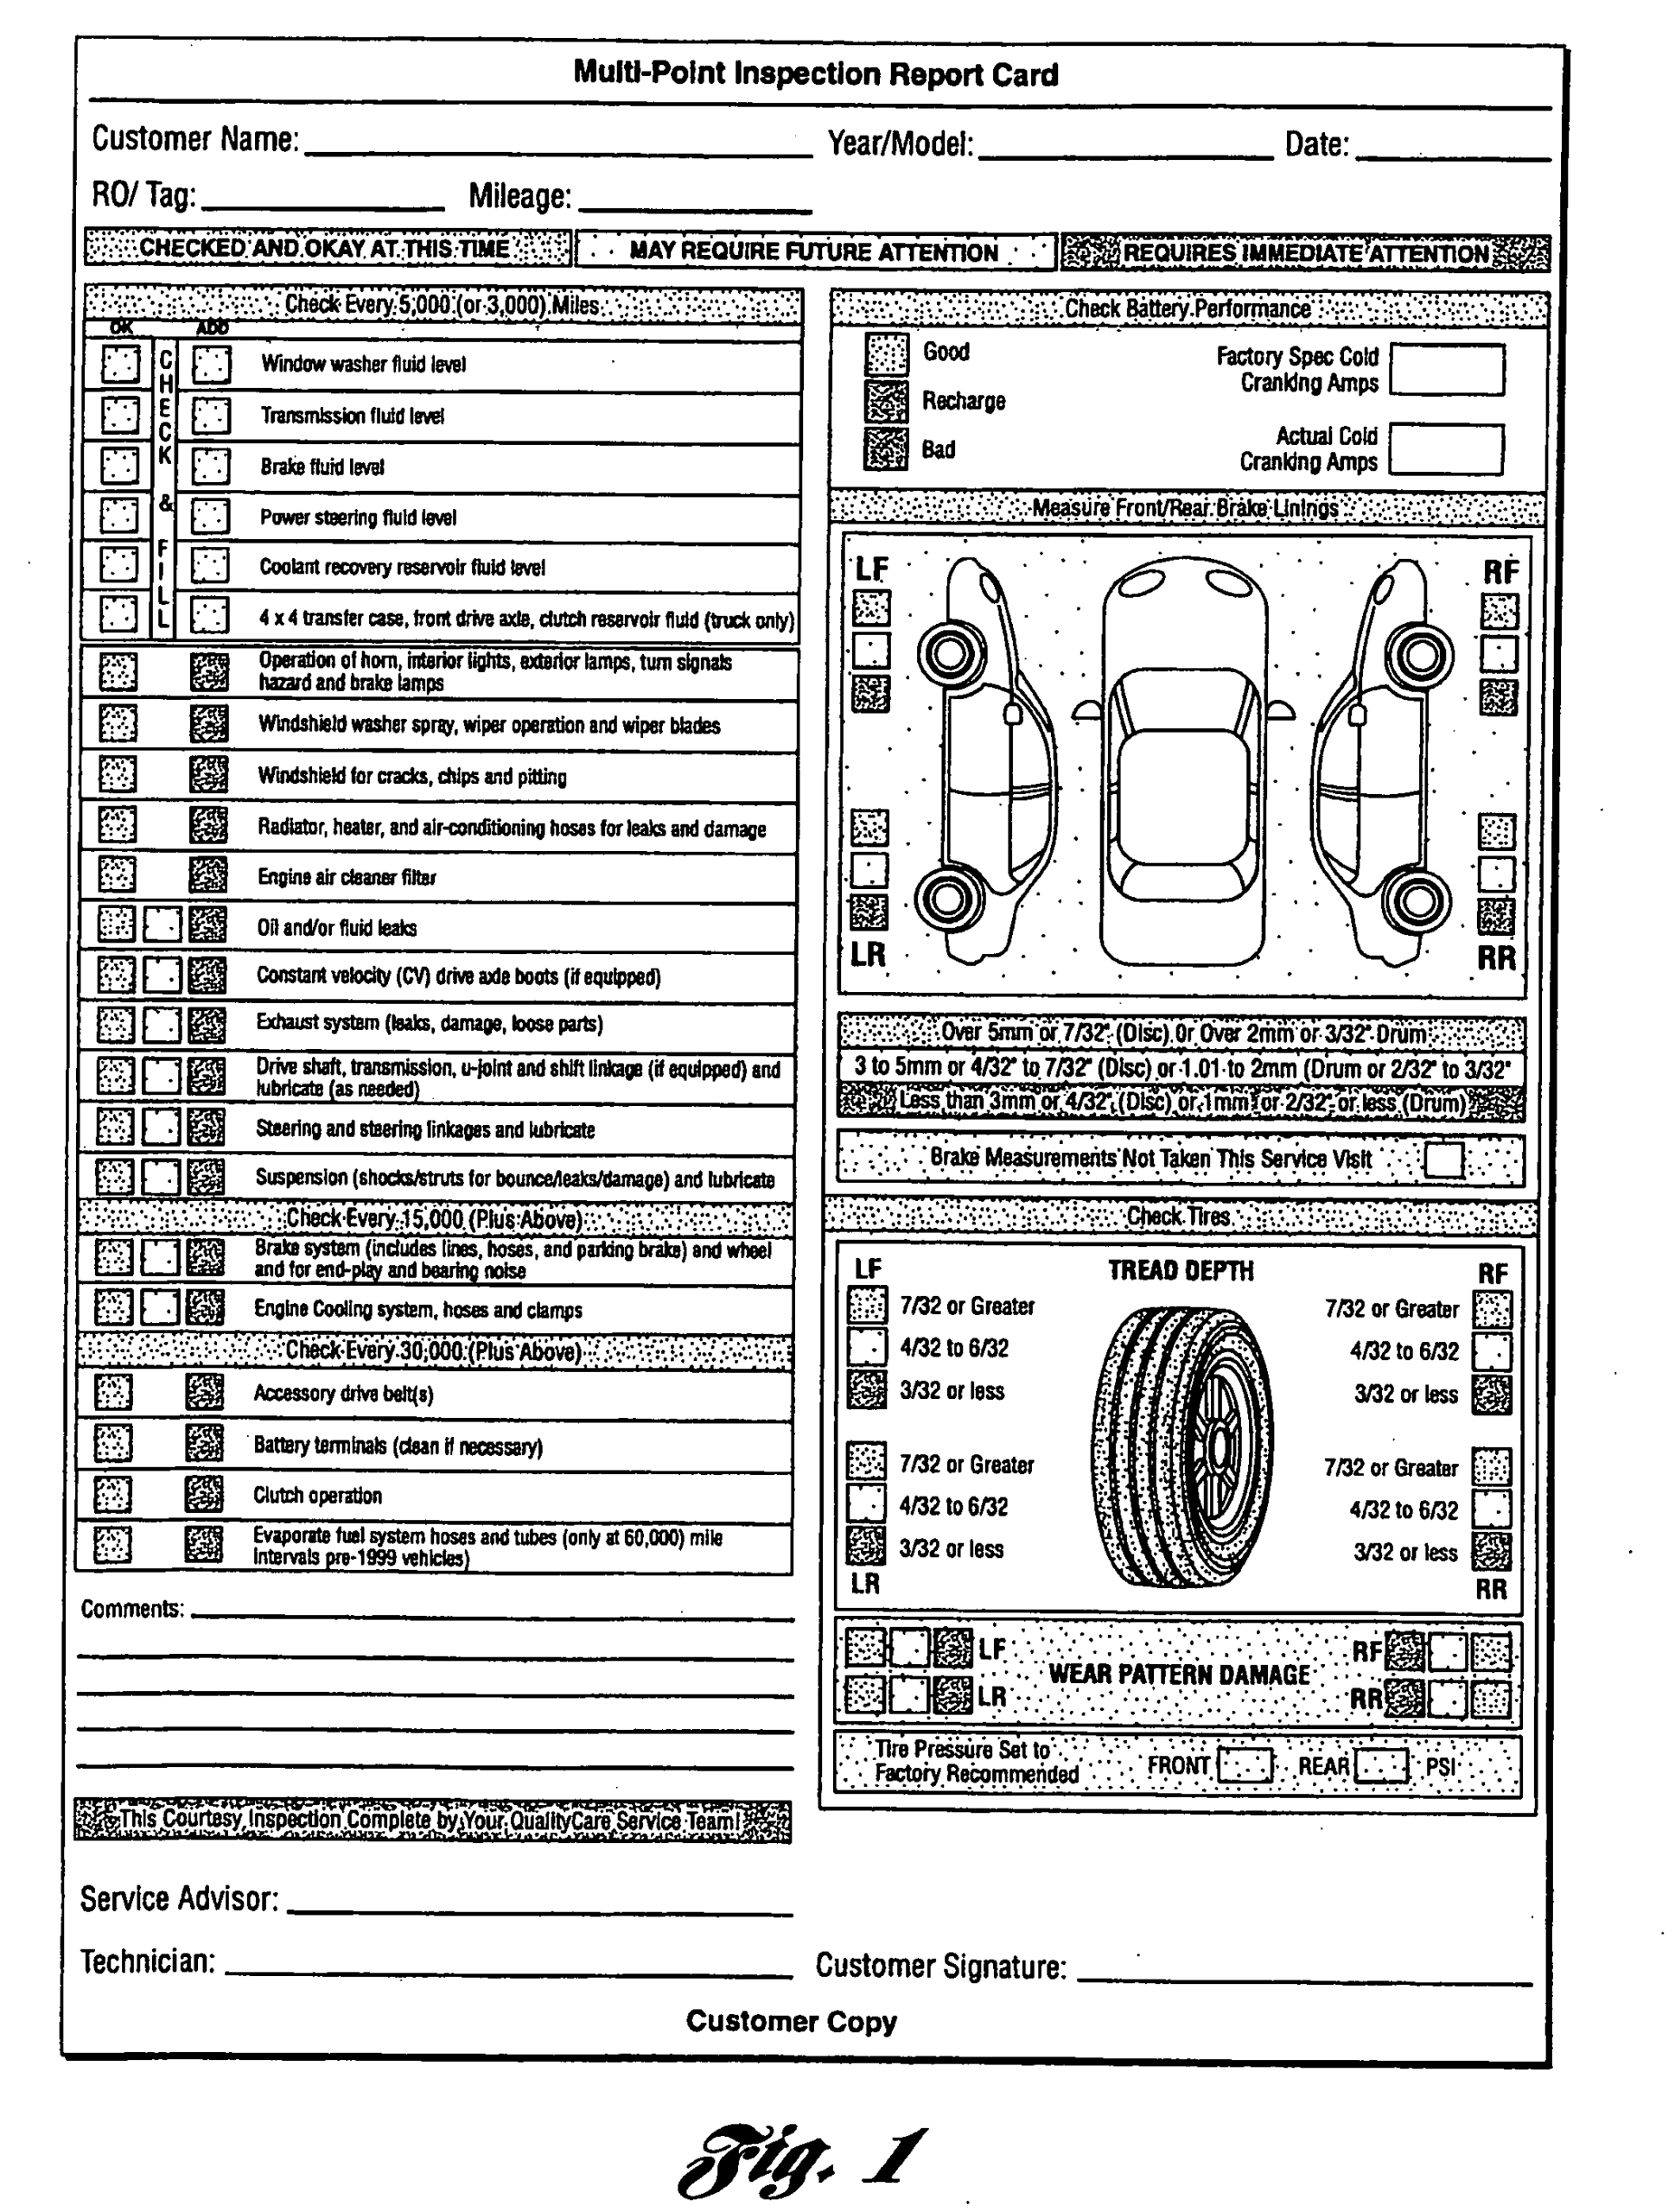 Multi Point Inspection Report Card As Recommendedford Within Welding Inspection Report Template